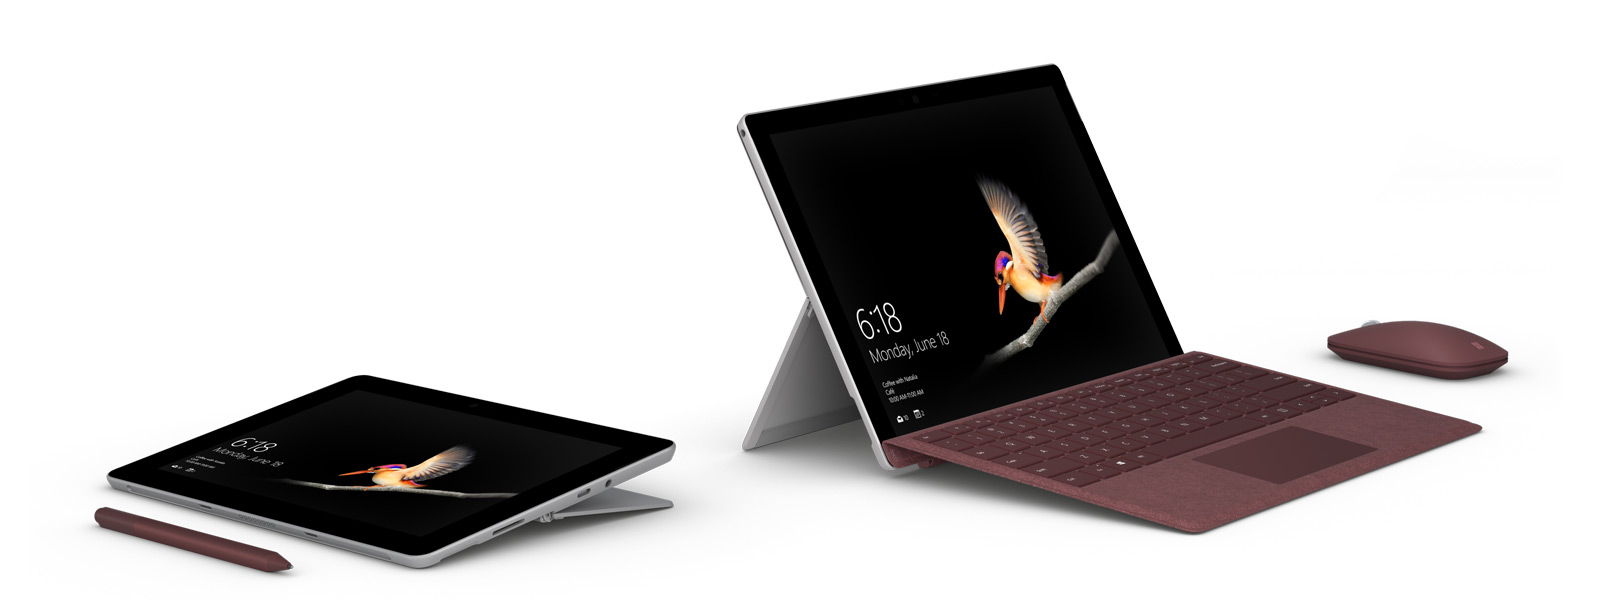 Surface Go in tablet and laptop mode.